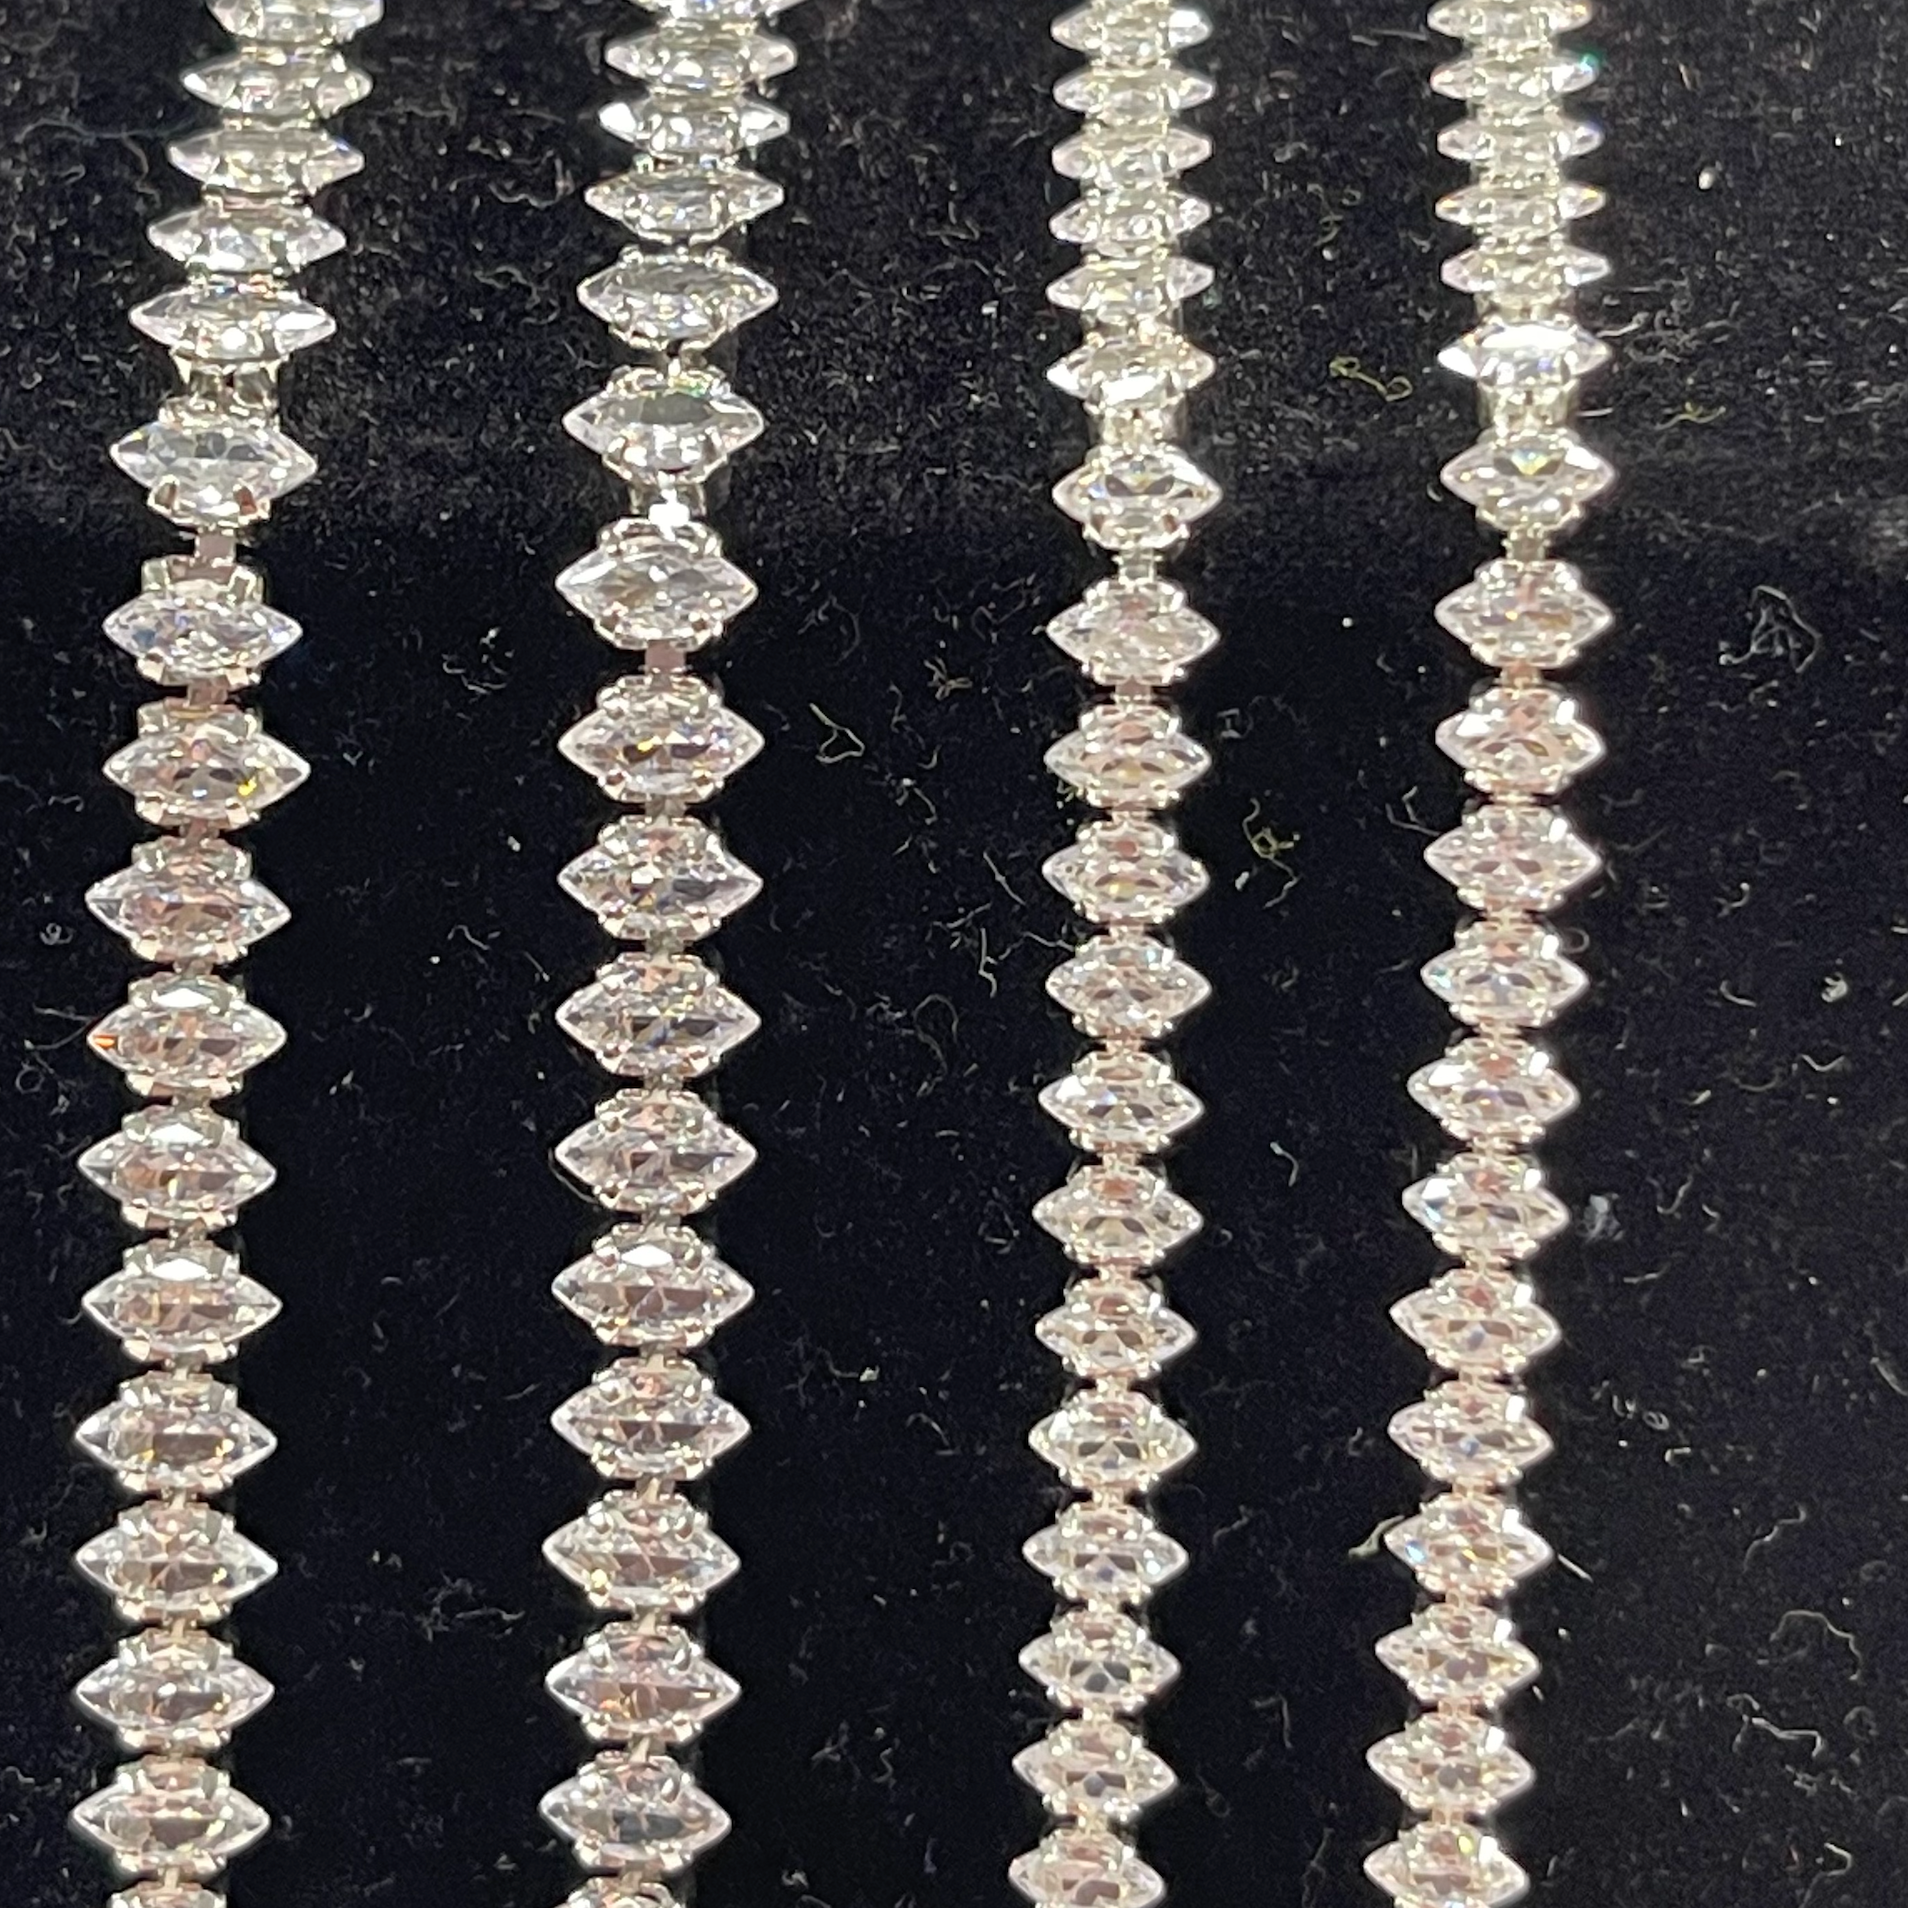 3*5mm & 3*4mm CLEAR DIAMOND STONE with Silver Rhinestone HIGH QUALITY Metal Chain, Sold in 18" *RARE* SS6 Metal Rhinestone Chain